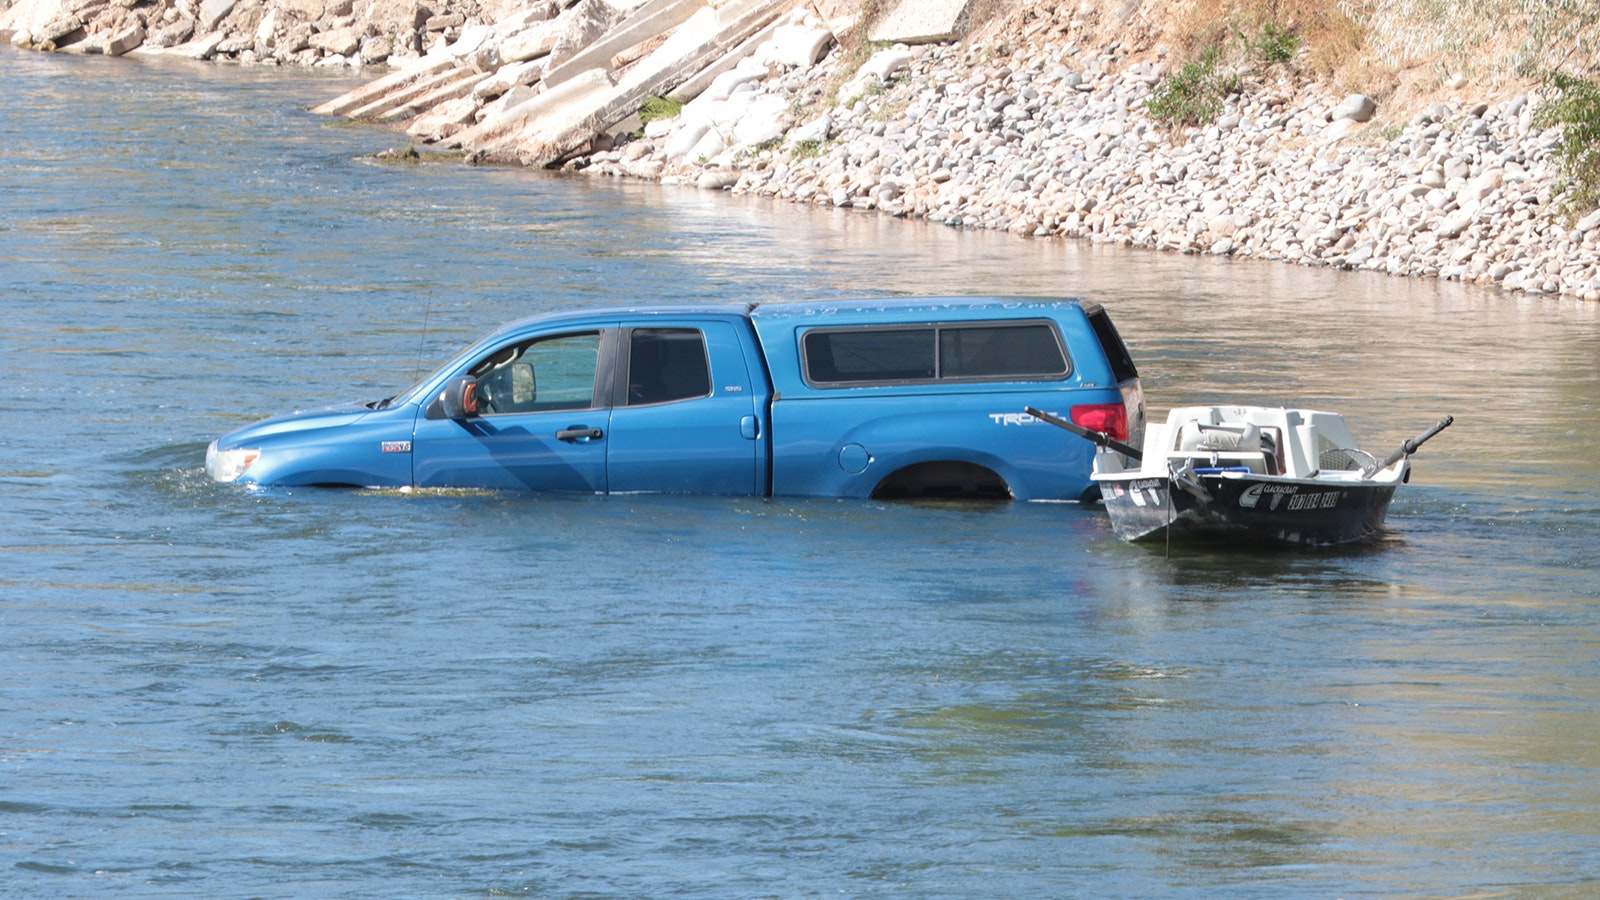 Floyd Tillery was surprised to see this pickup submerged in the Bighorn River on Thursday still connected to a trailer and boat.